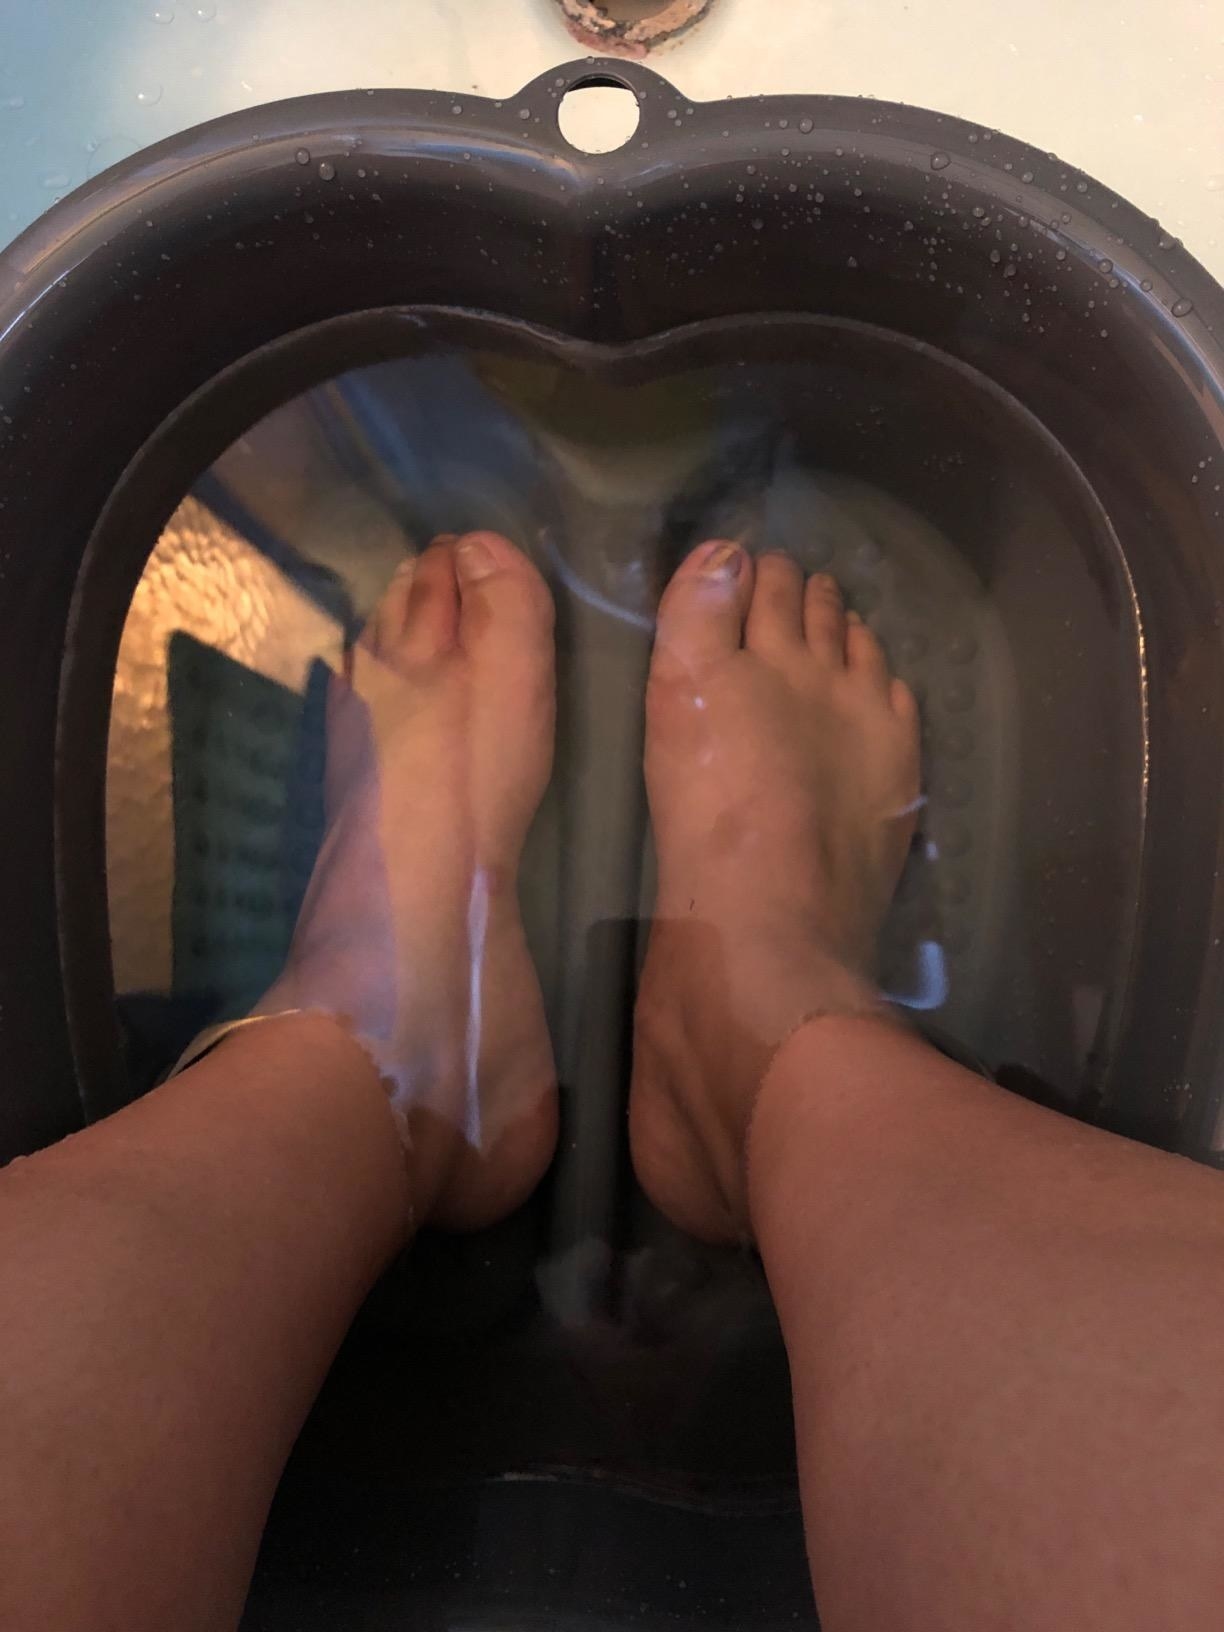 A reviewer with their feet inside the basin filled with water